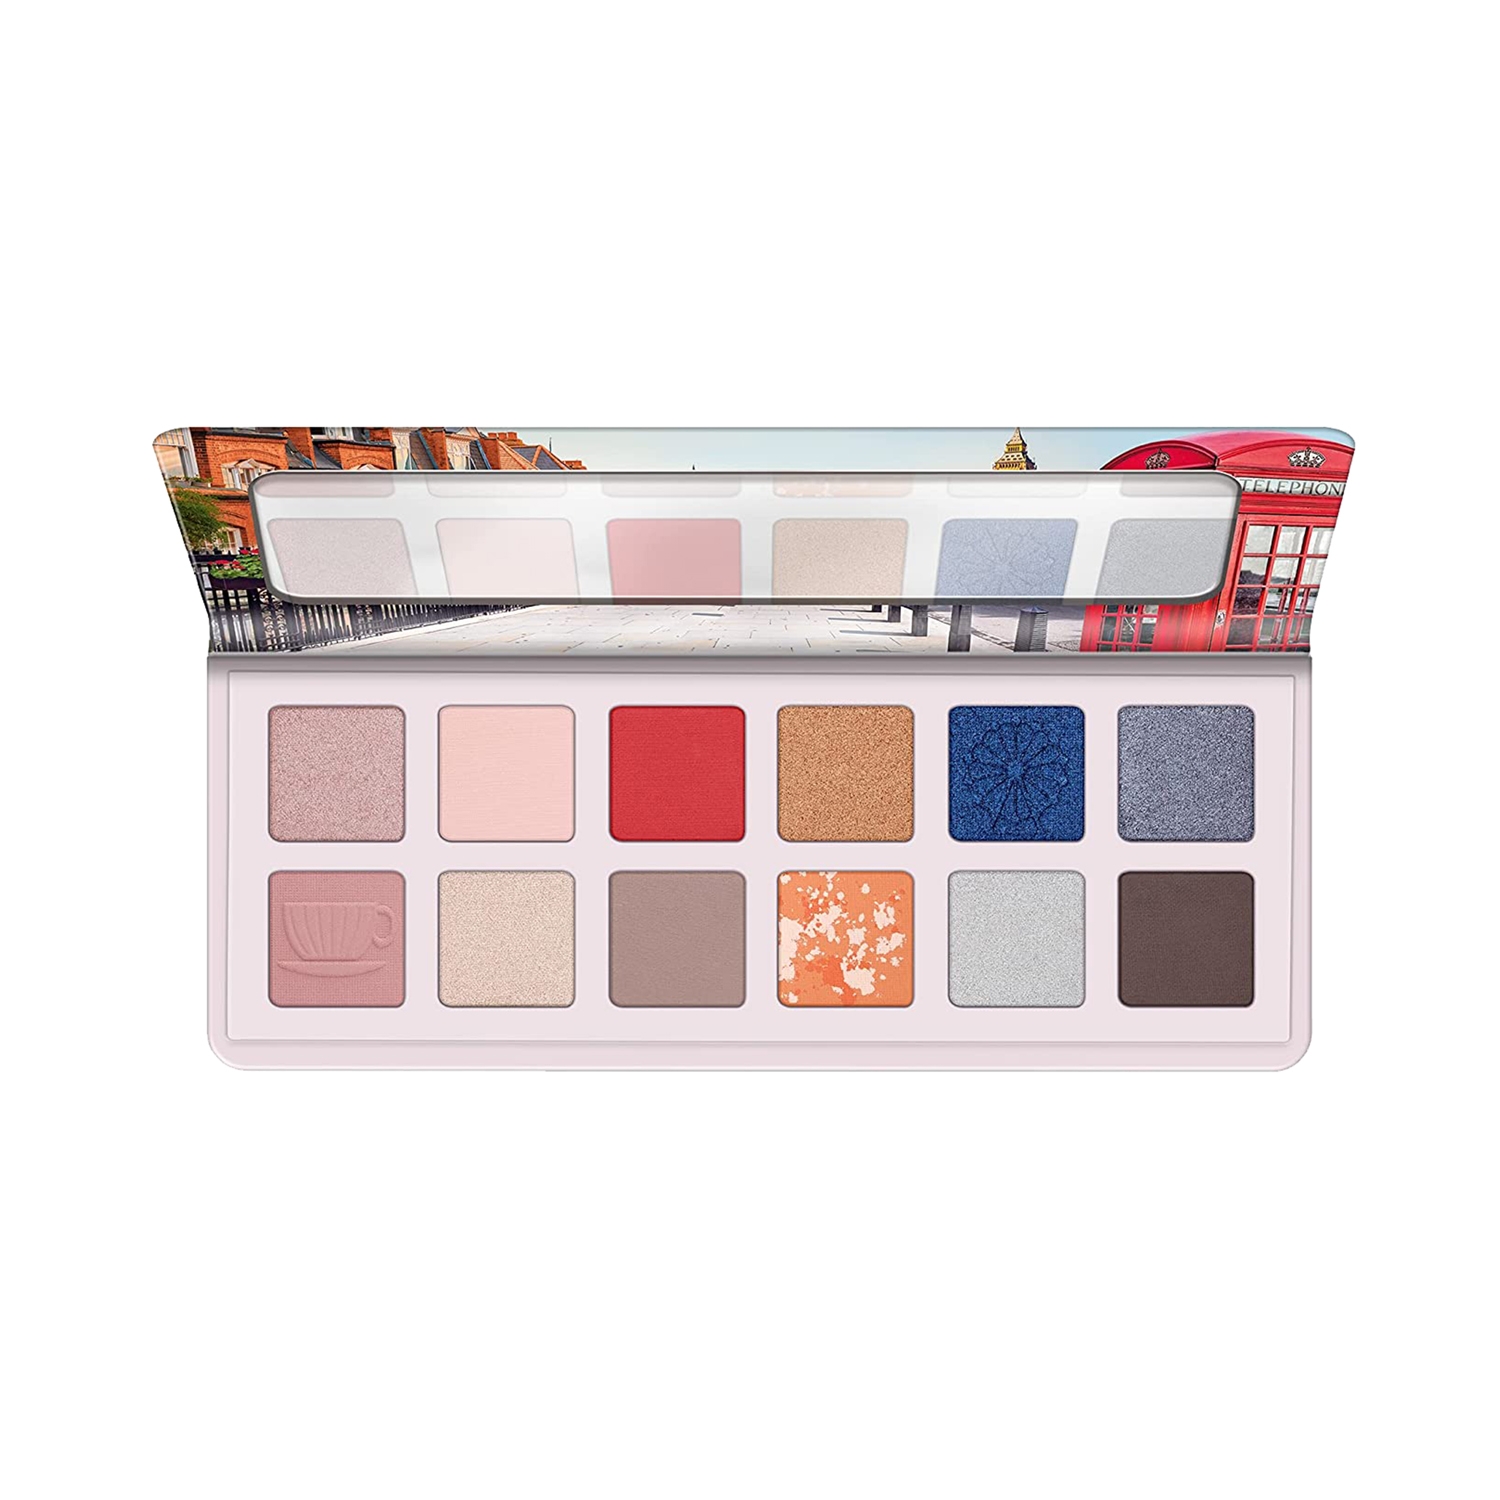 Essence Welcome To London Eyeshadow Palette - Multicolor (13.2g)